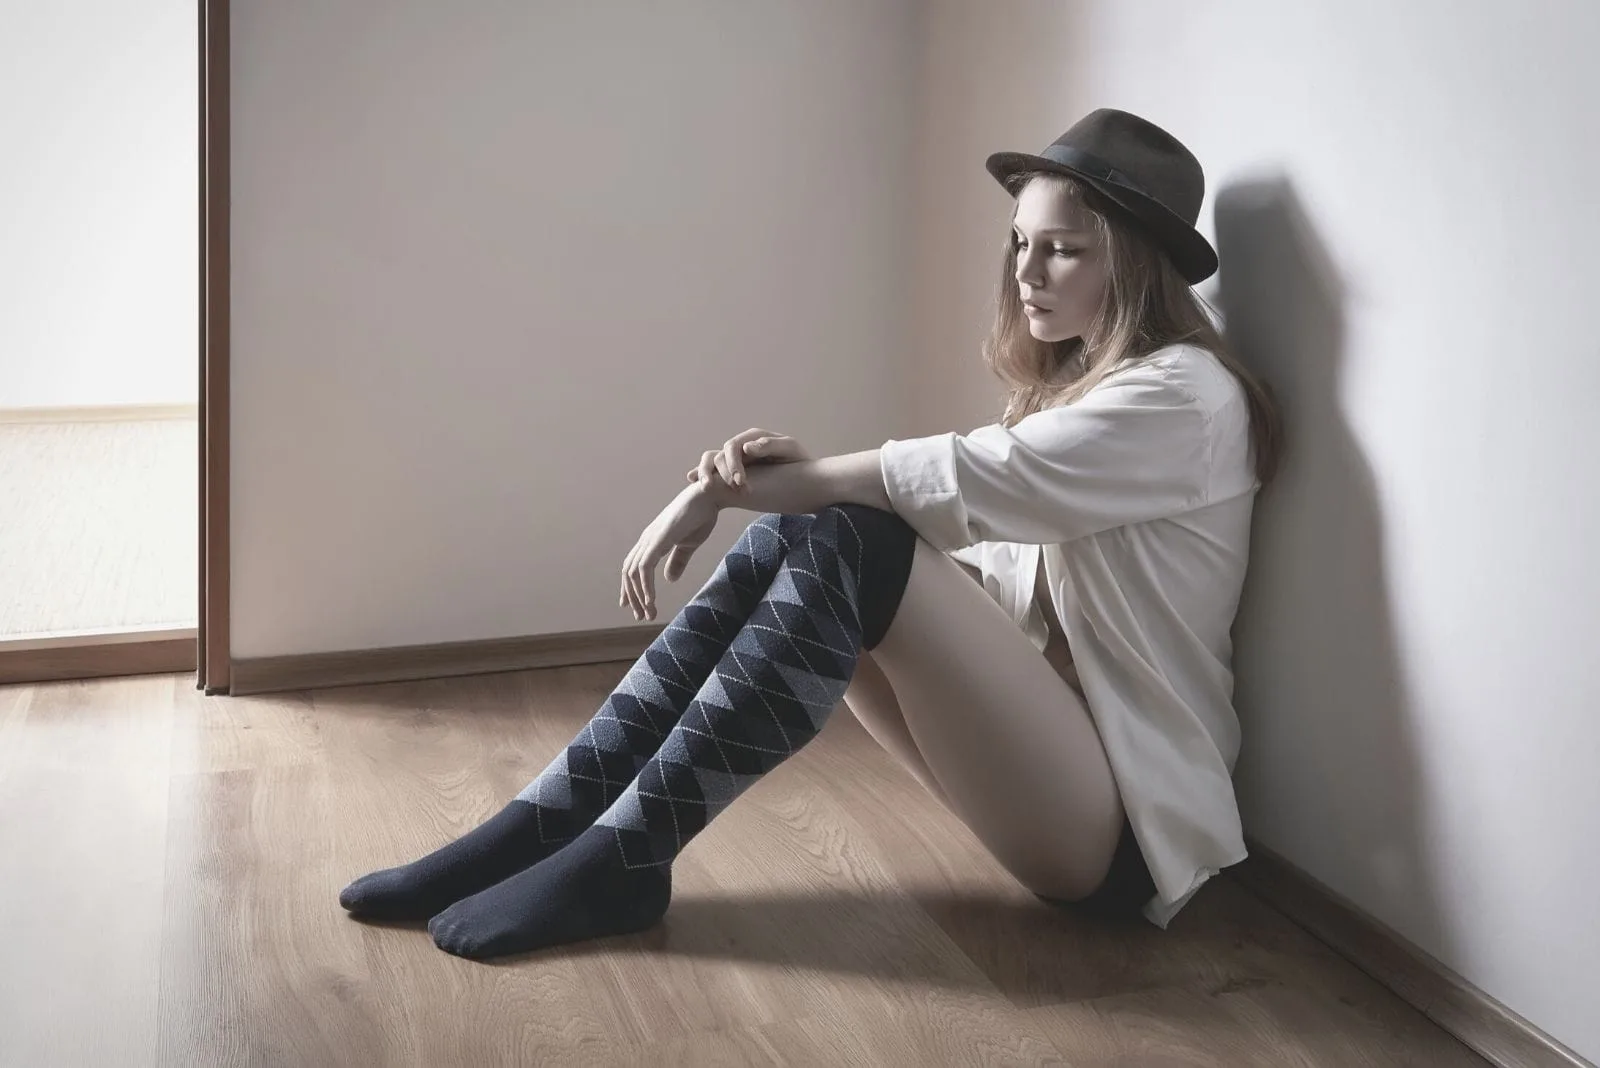 woman with a hat sitting on the floor inside the room looking sad